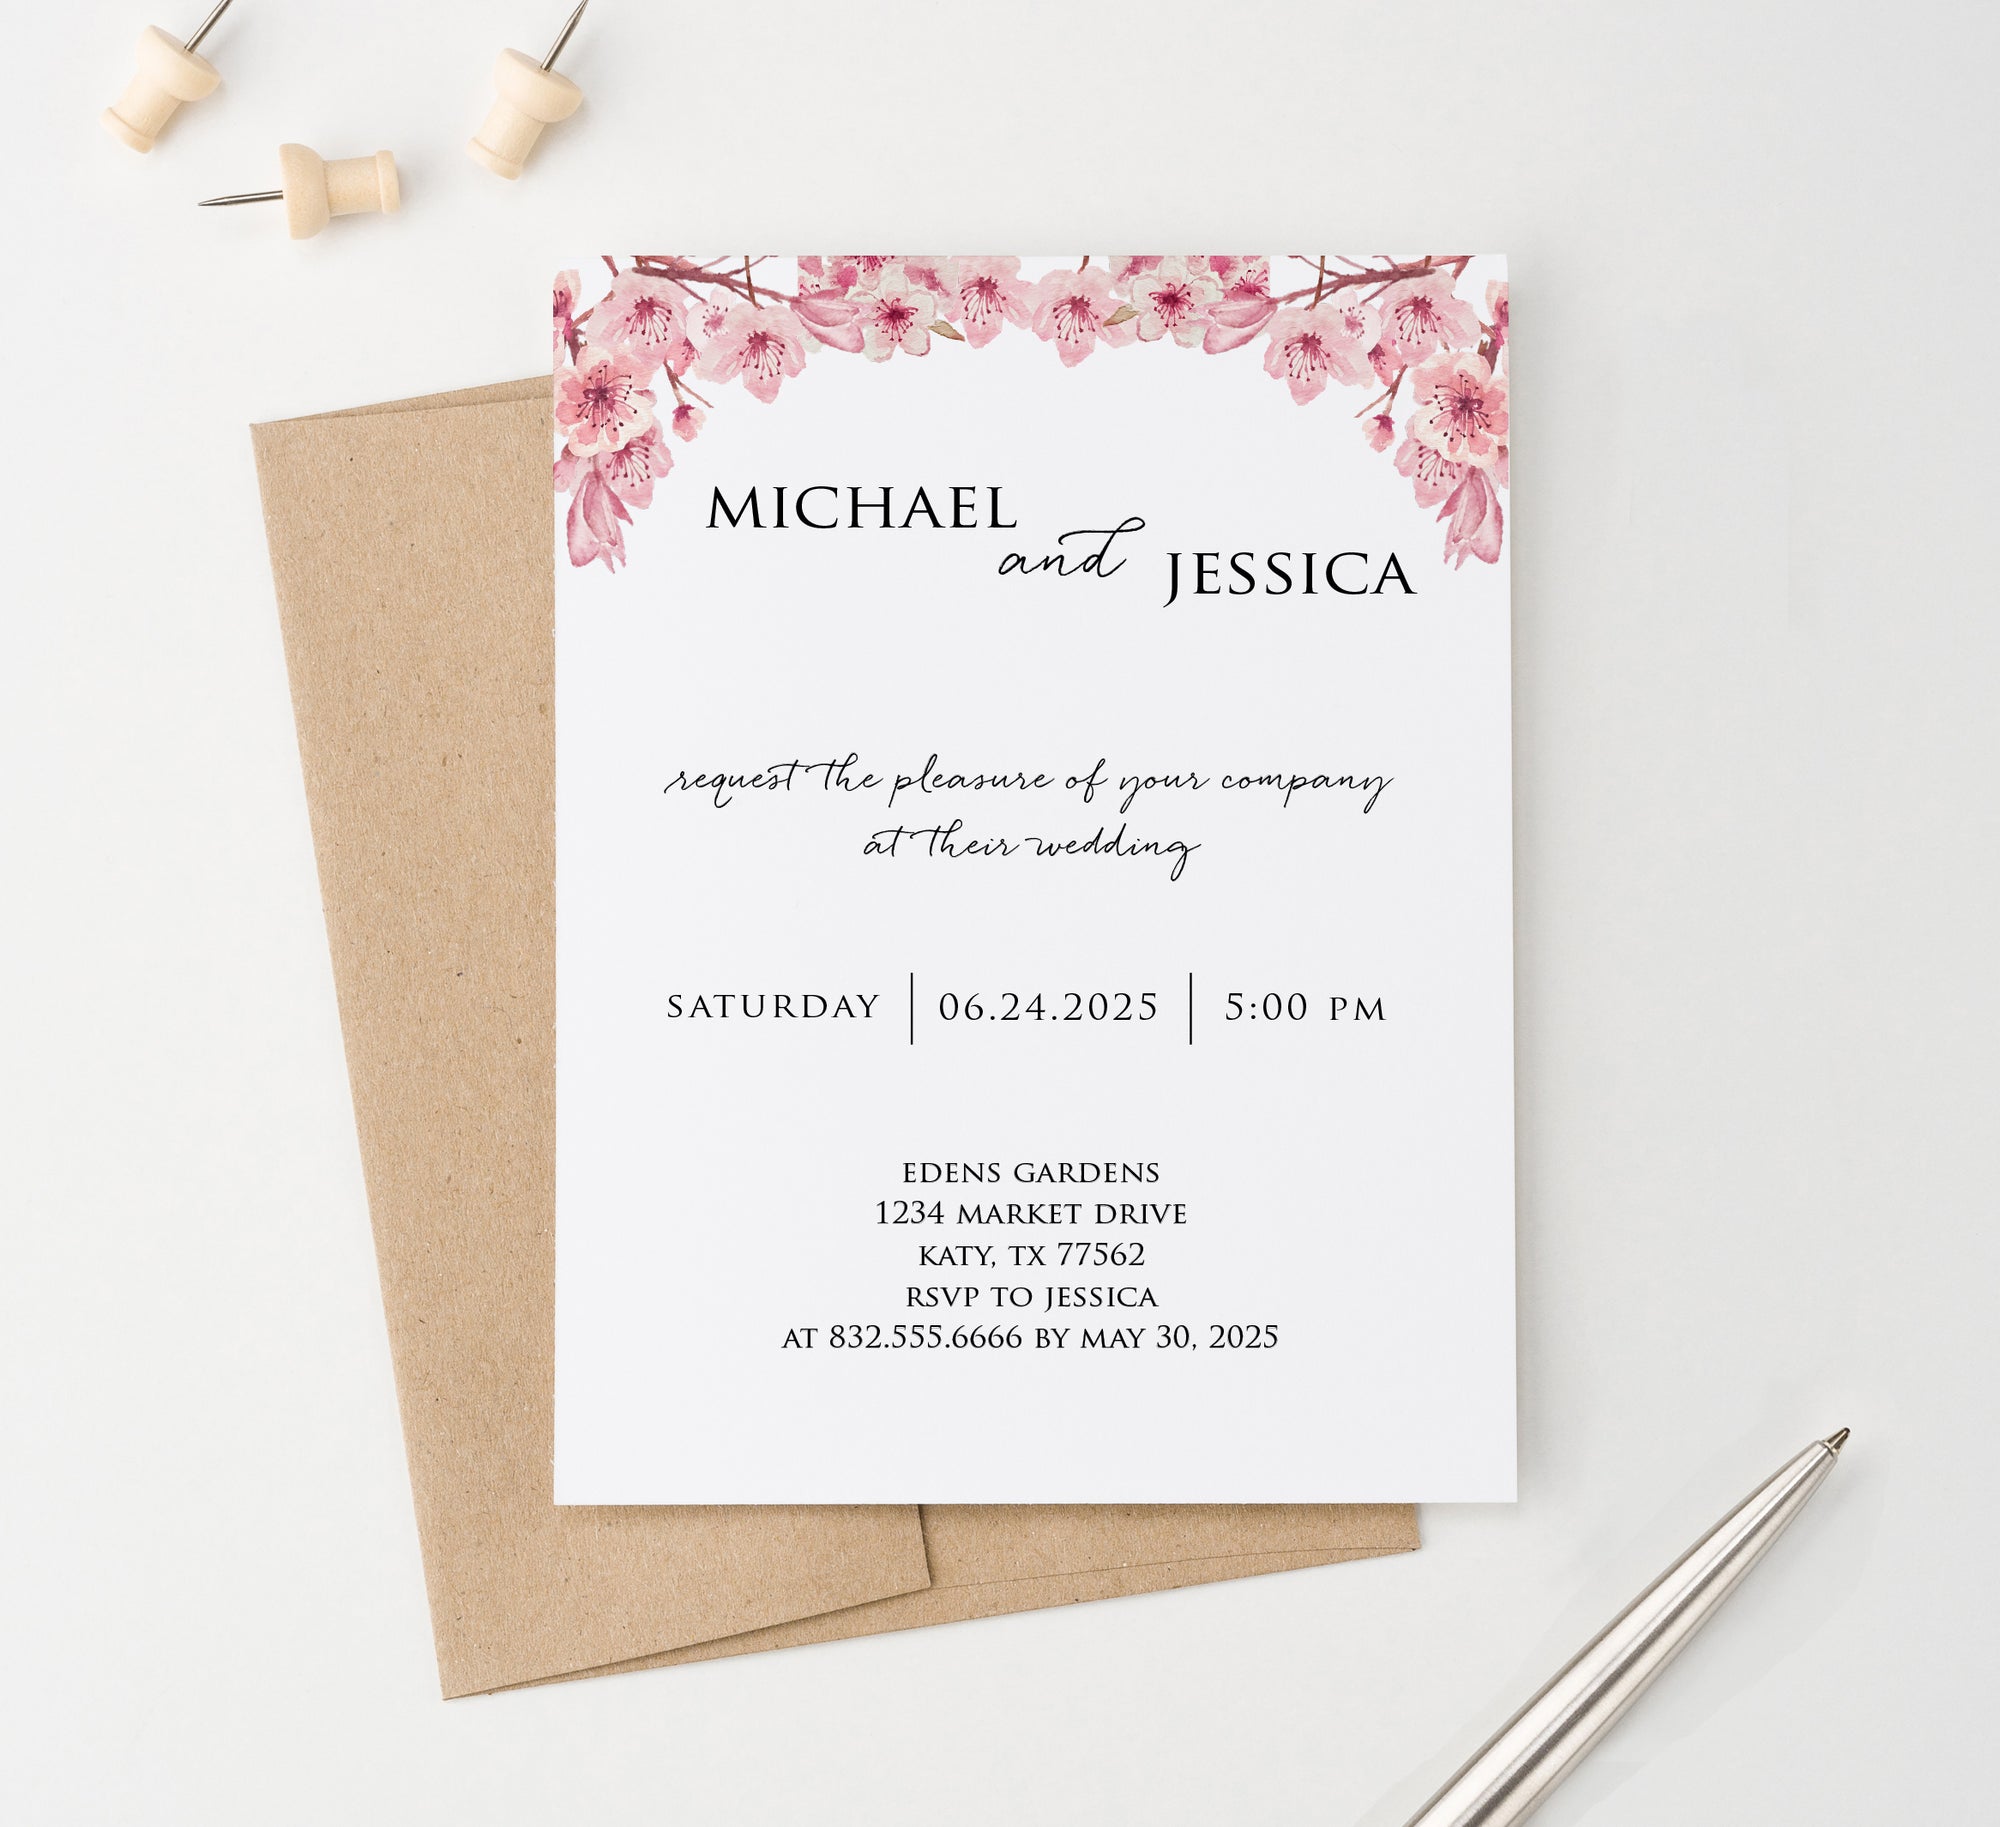 WI022 Customized Cherry Blossom Wedding Invitations invites floral flowers japanese marriage